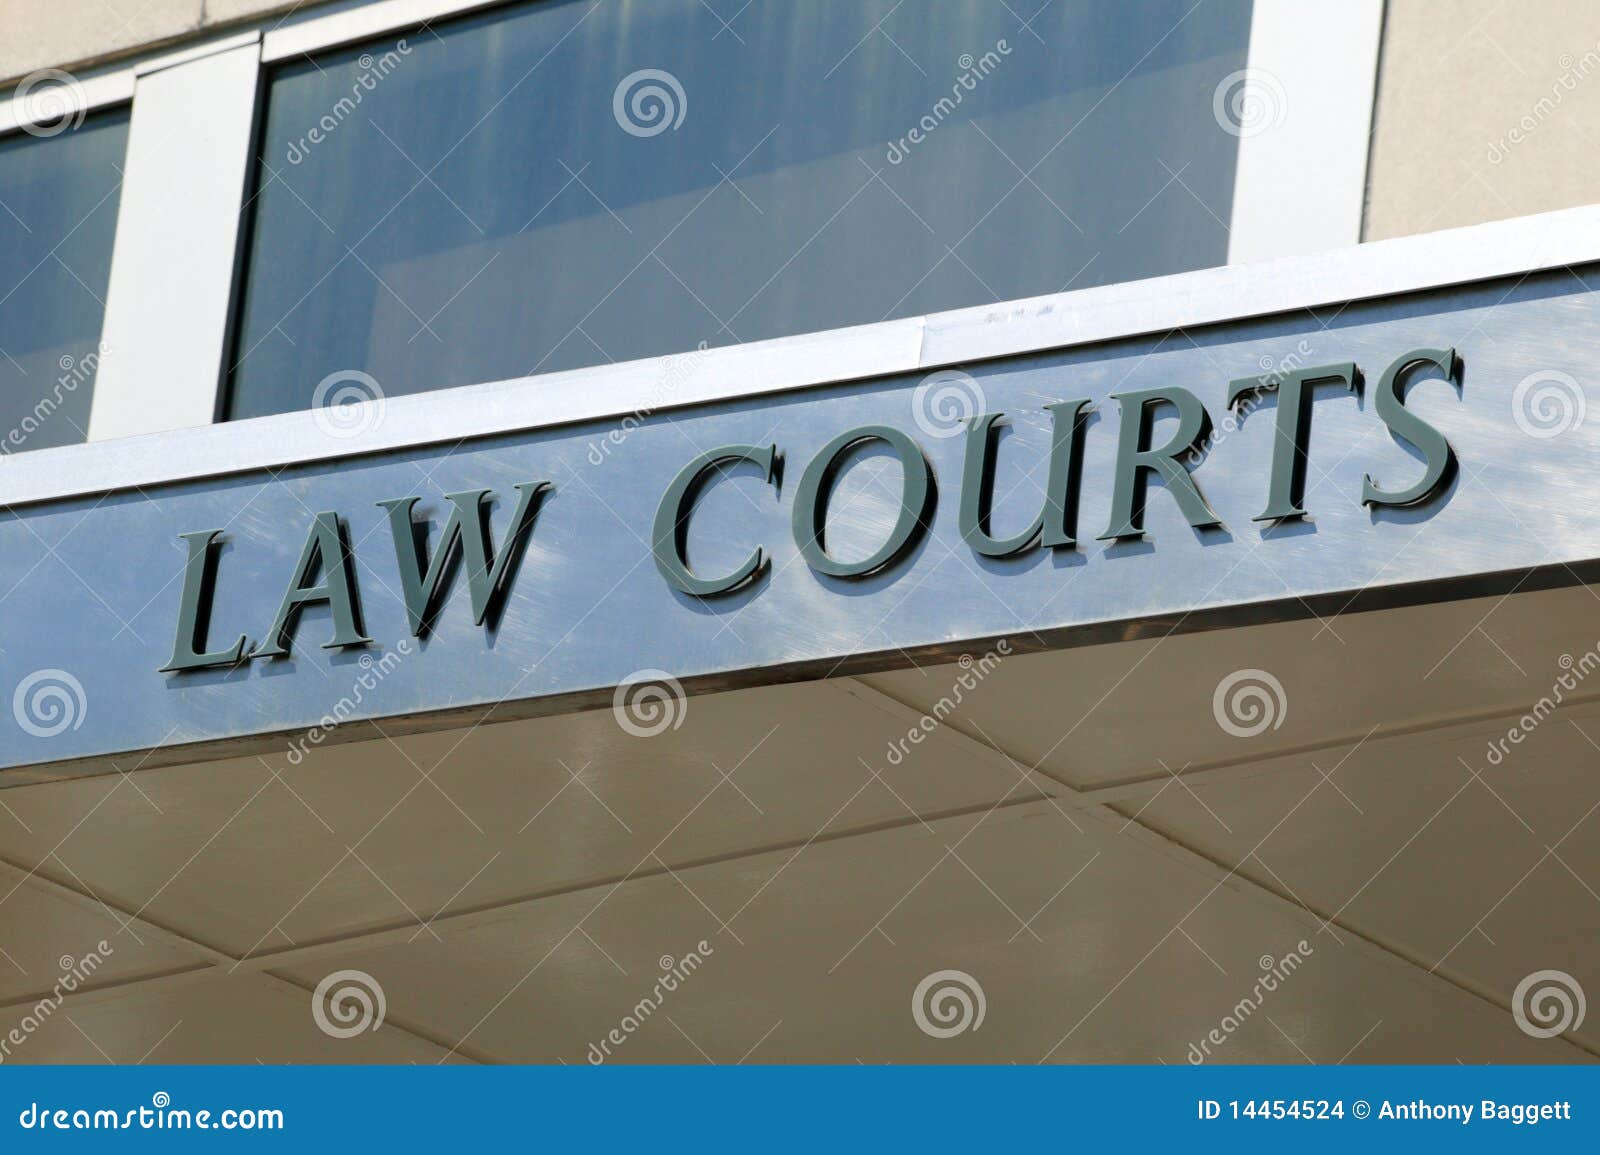 law courts sign